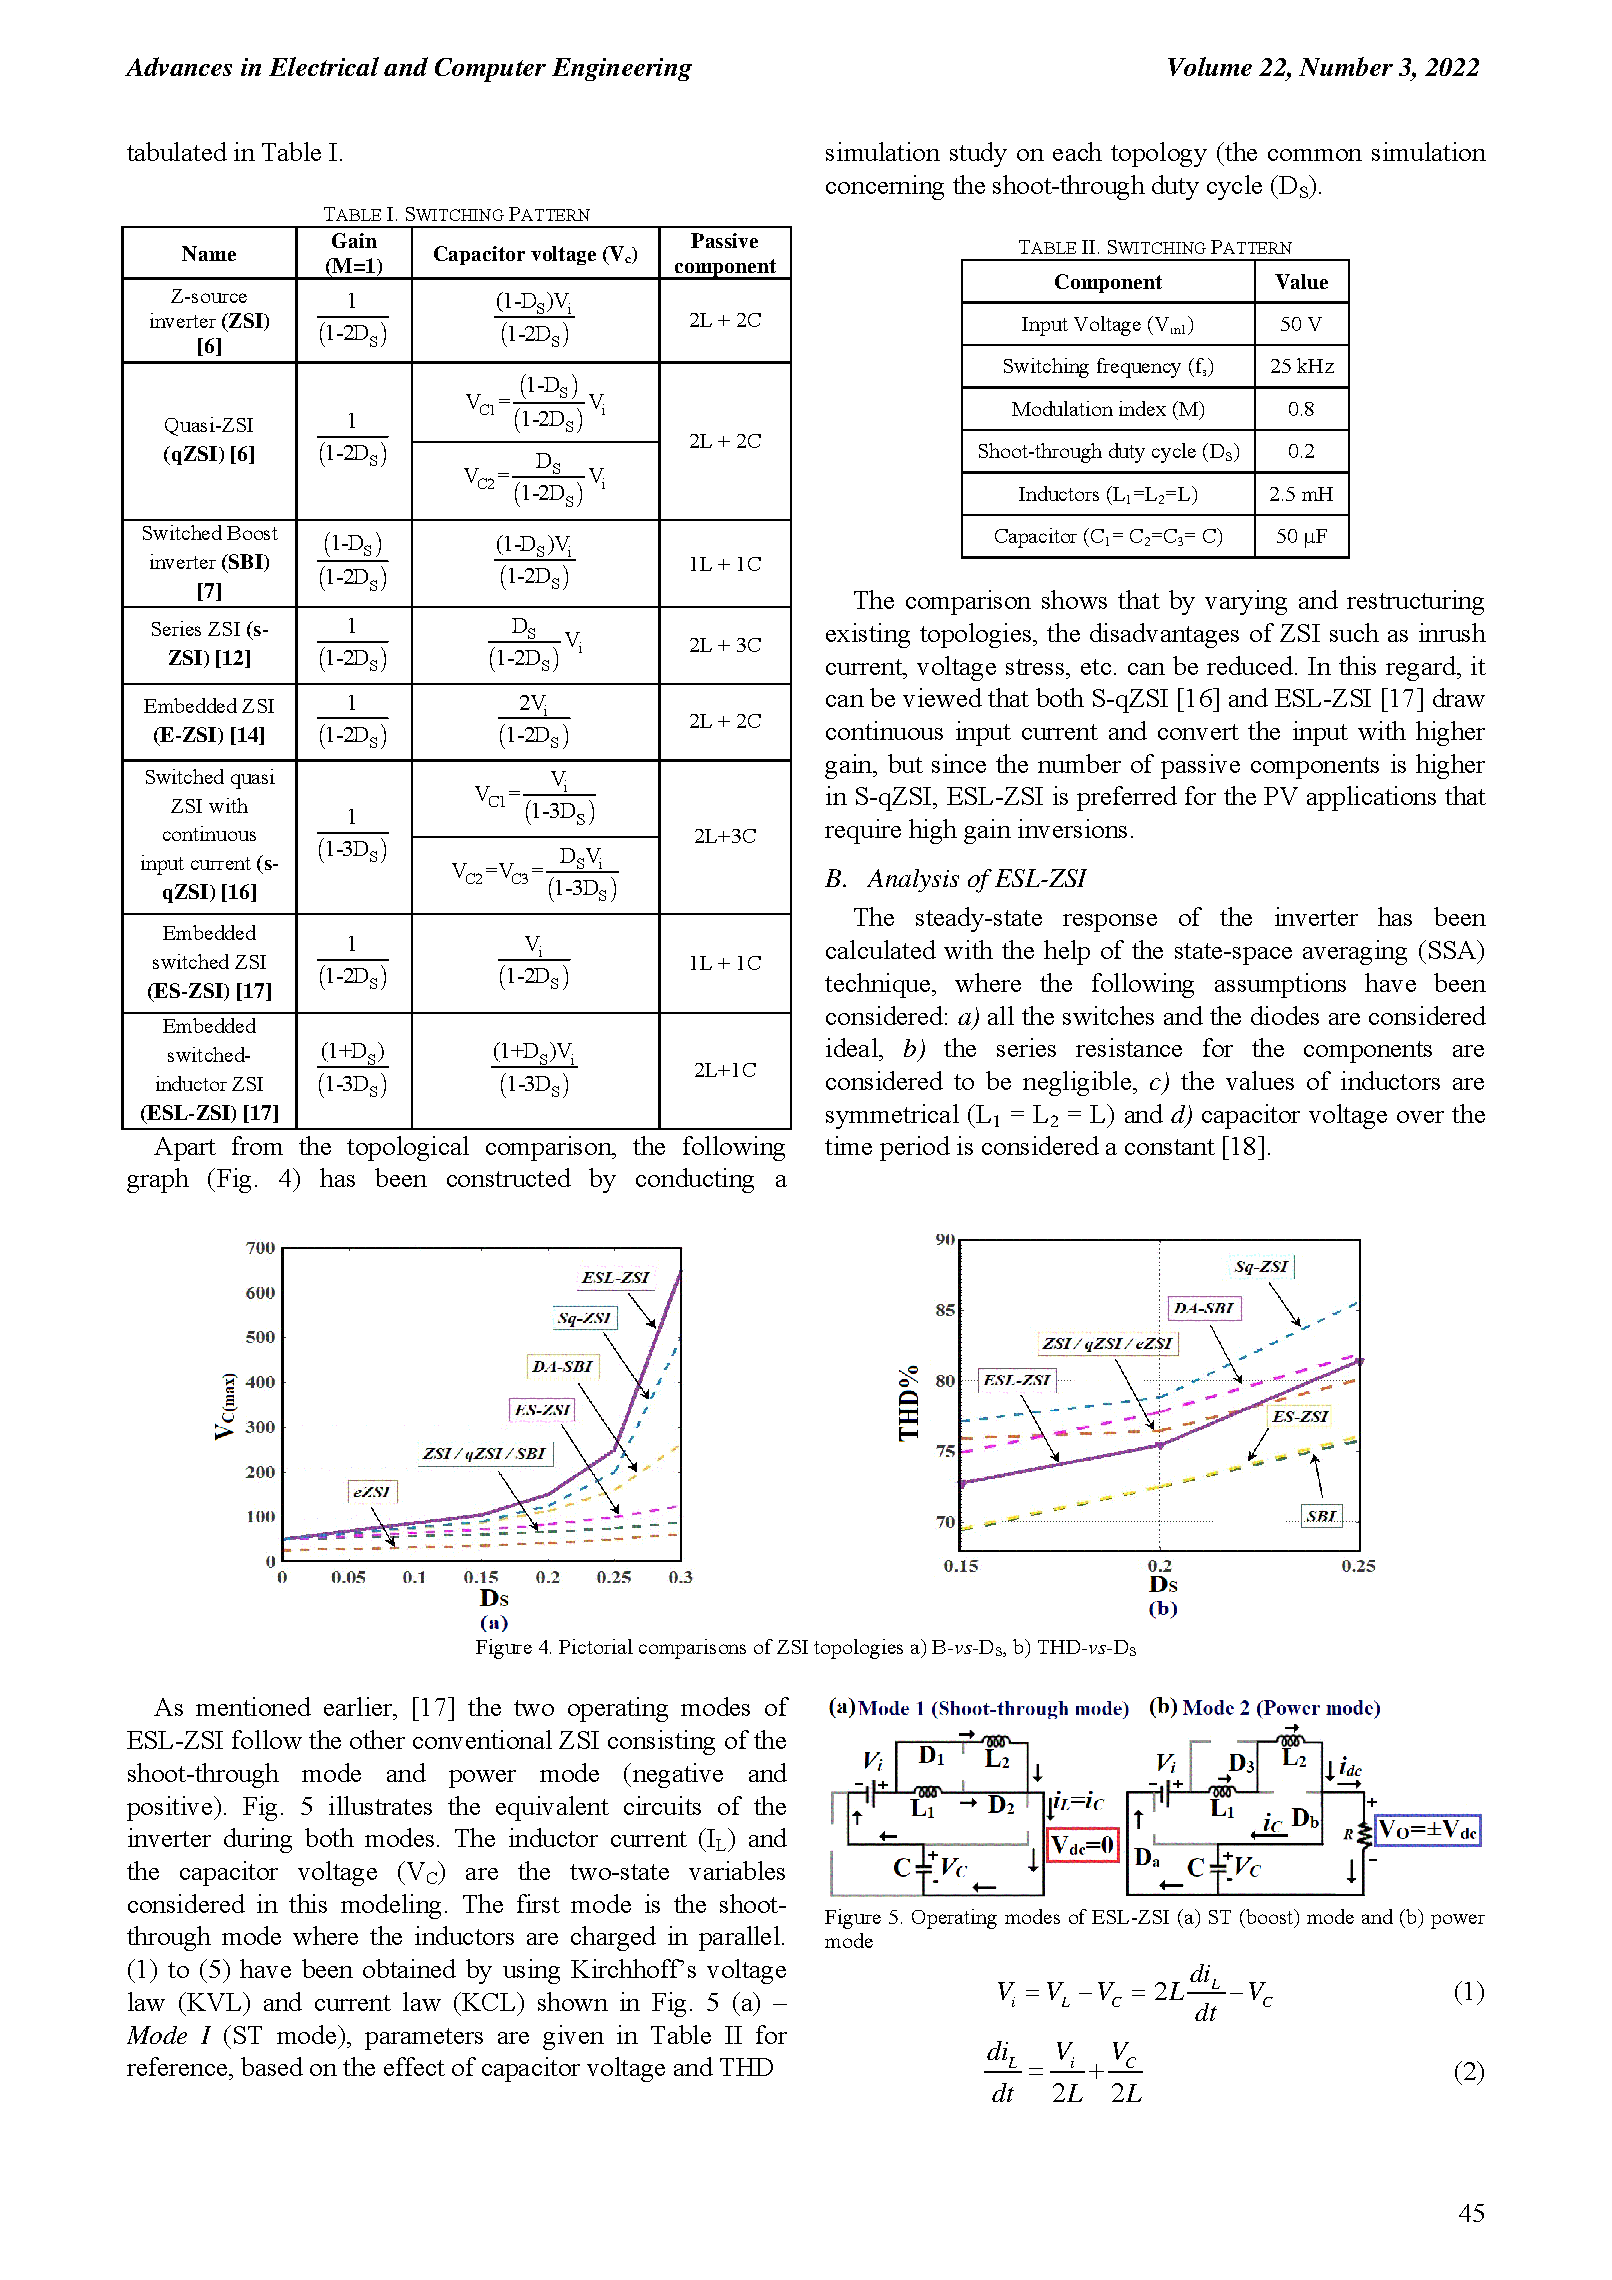 PDF Quickview for paper with DOI:10.4316/AECE.2022.03005